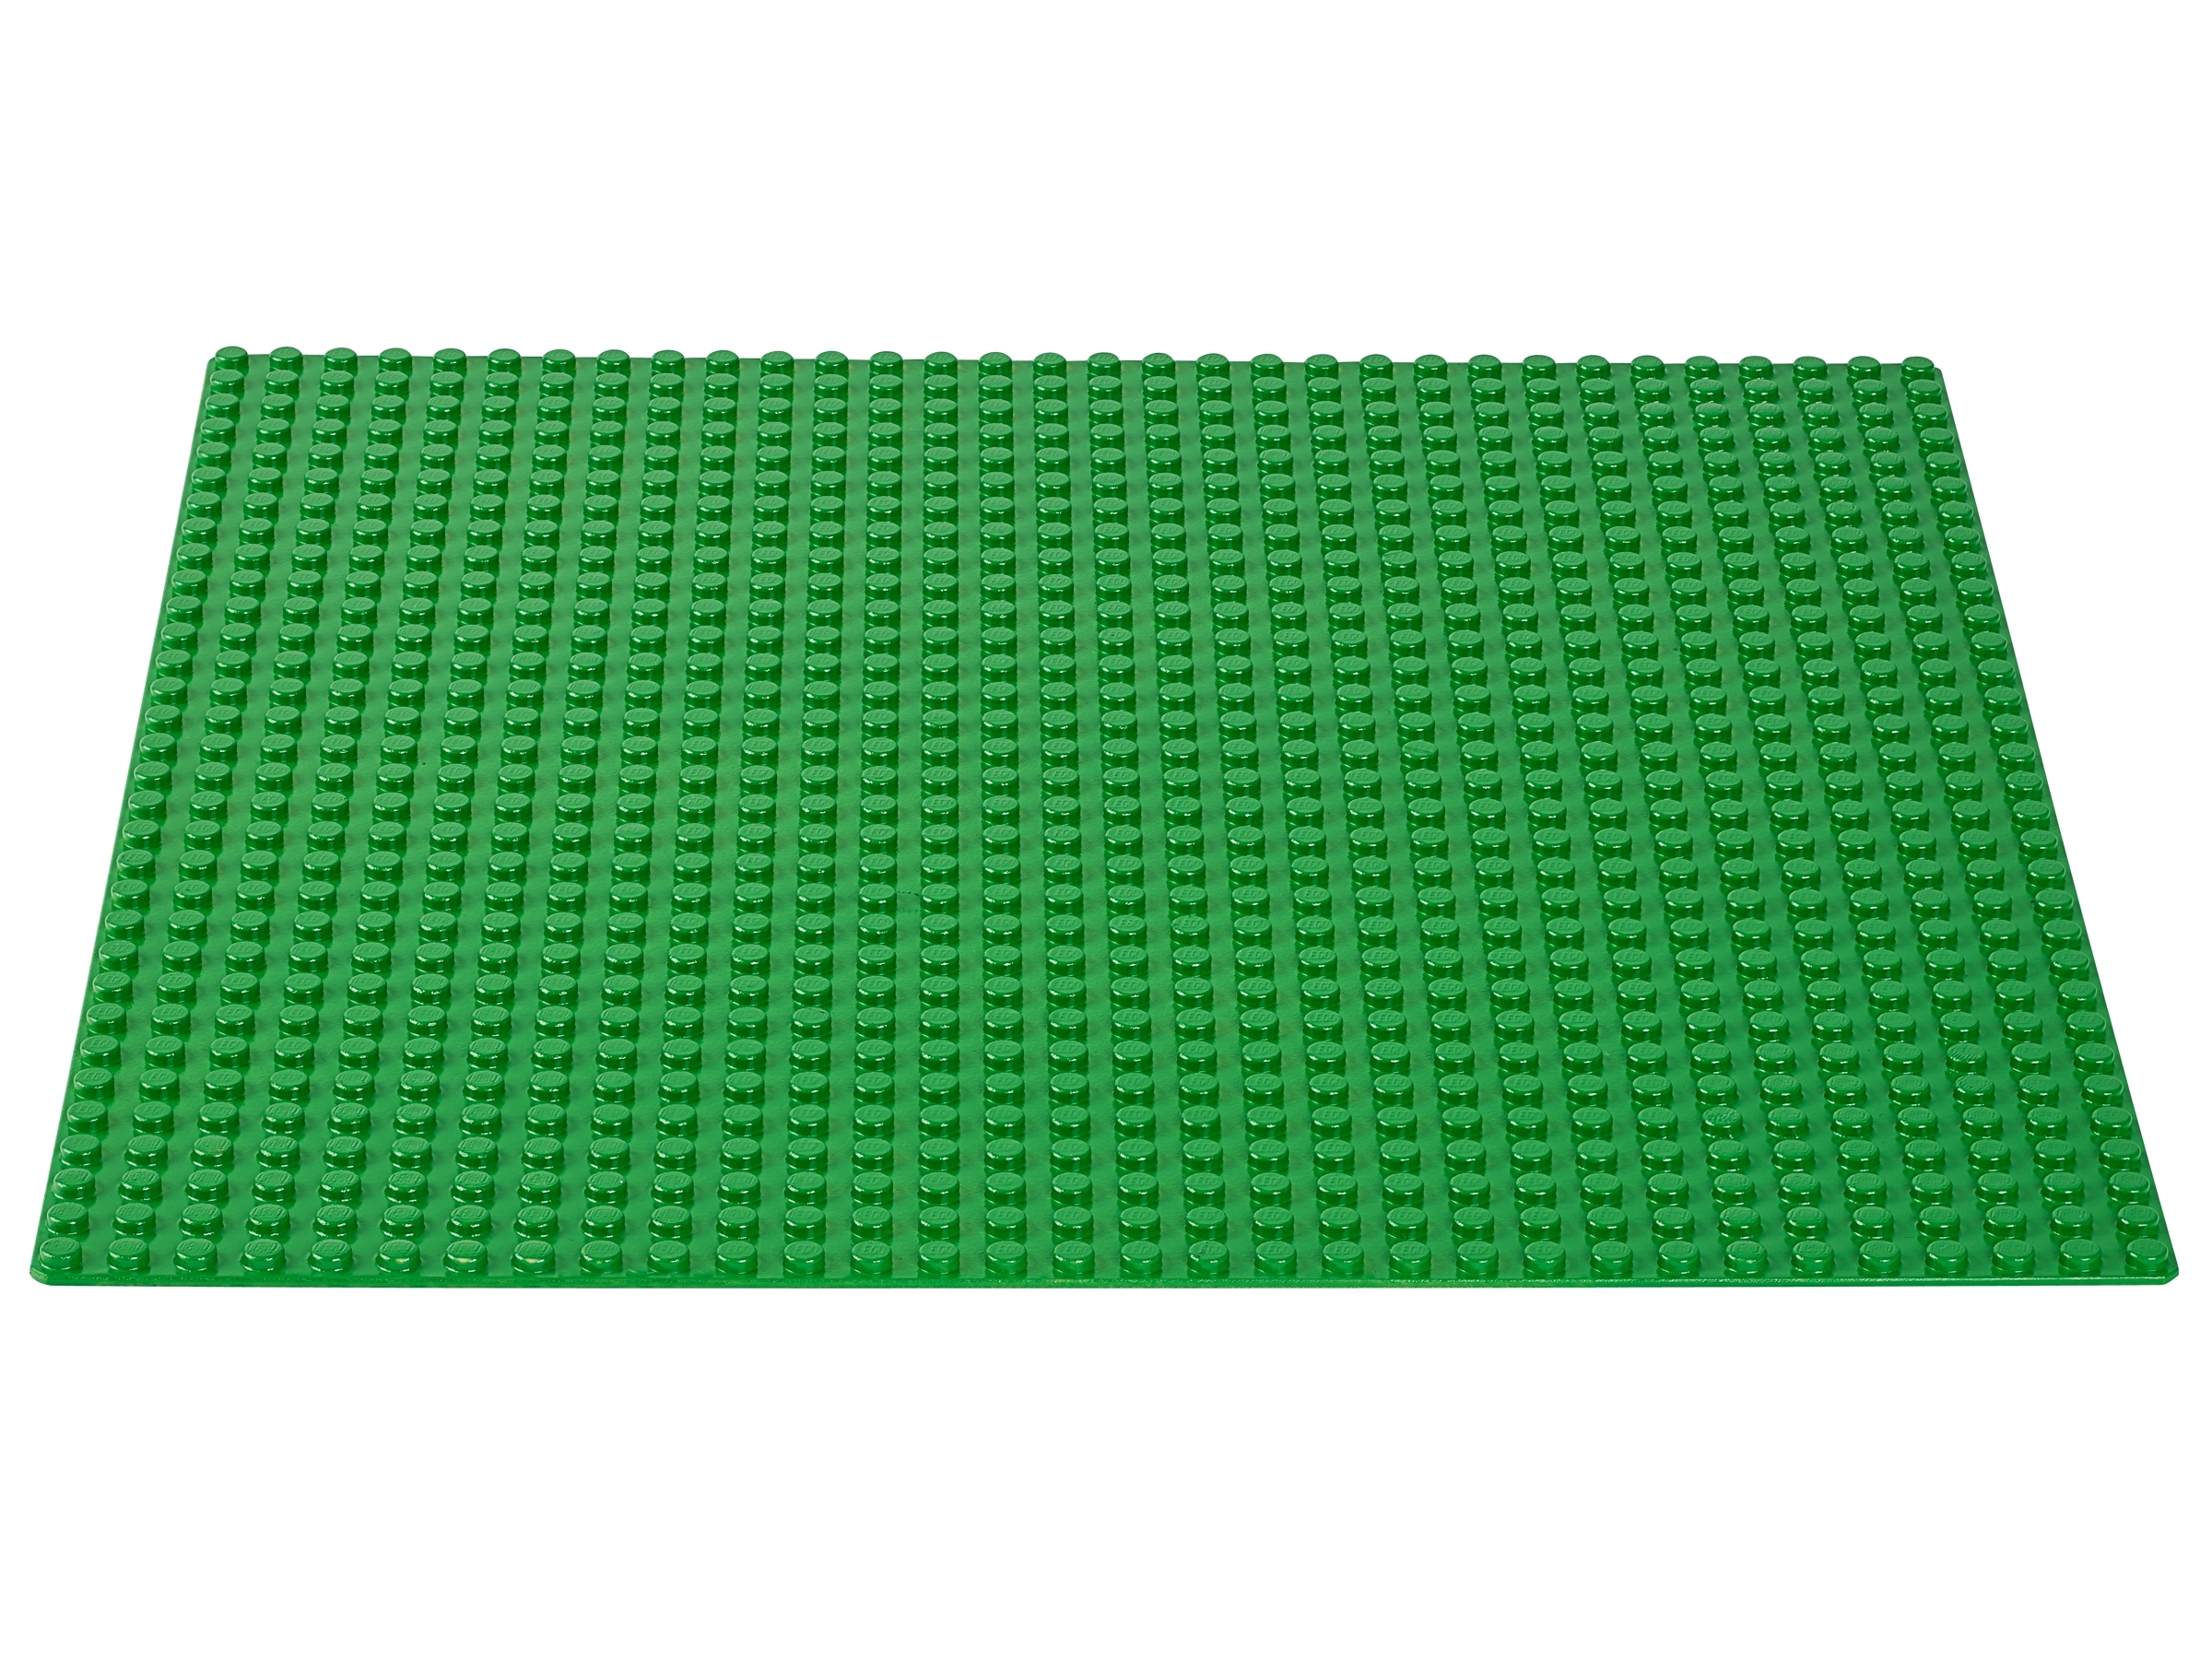 LEGO Large Plates 6x12 BRIGHT GREEN # pack of 5 # flat base plate 12x6 minecraft 